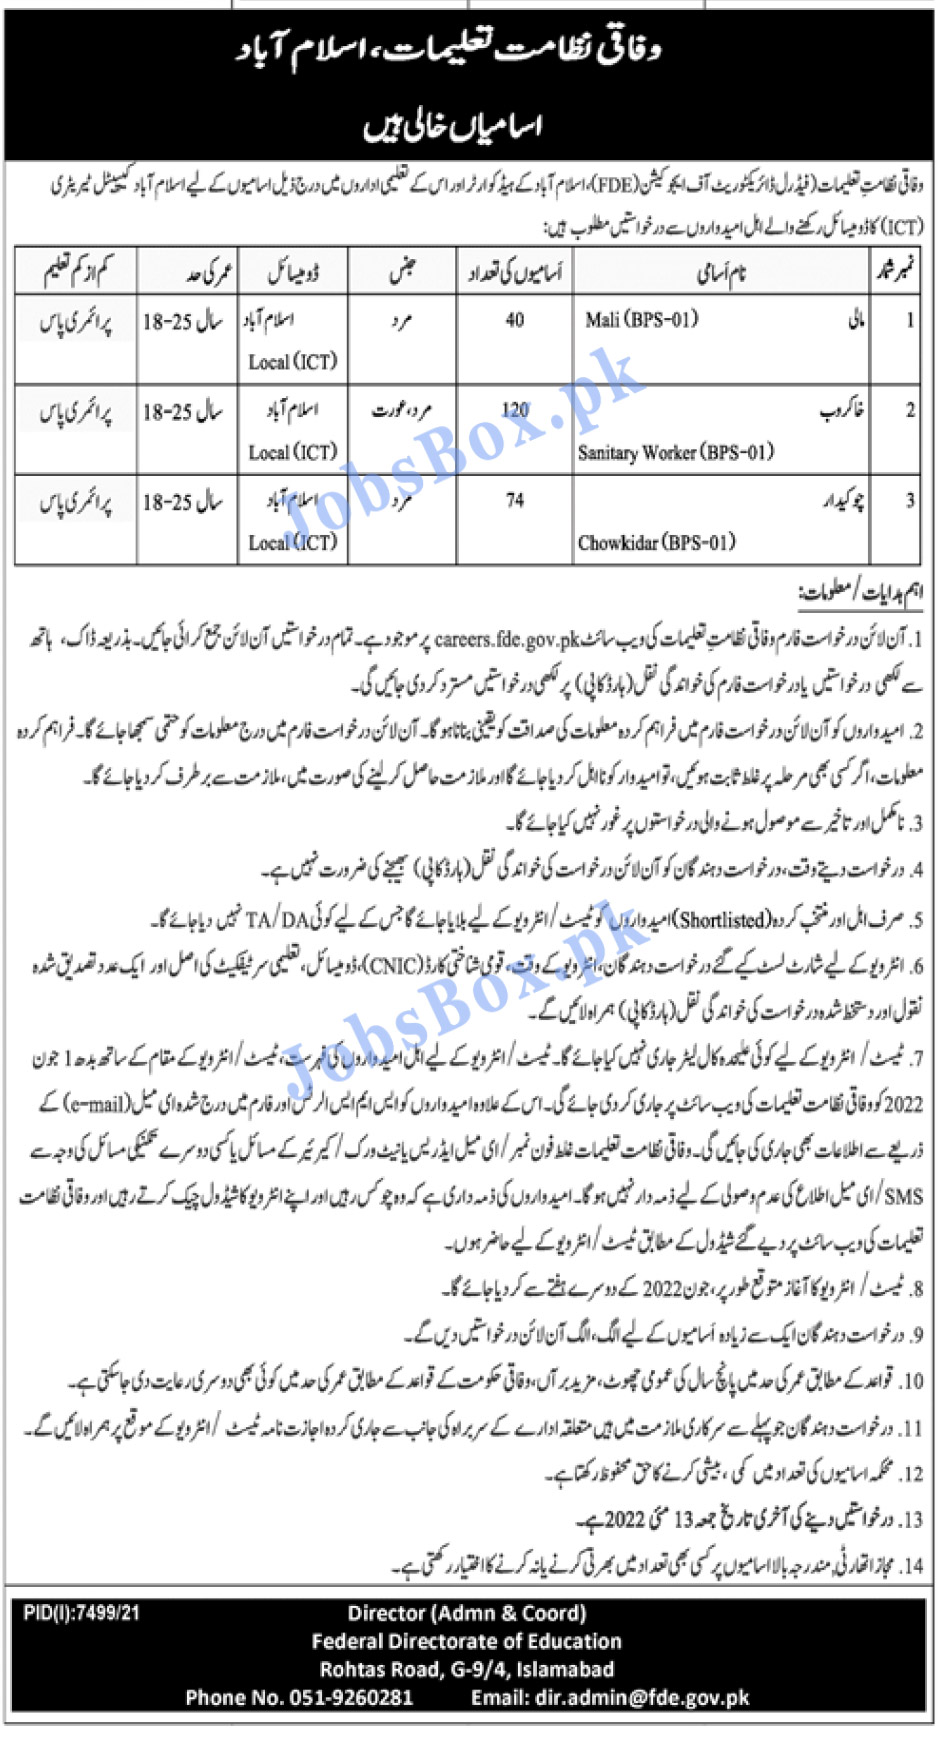 Federal Directorate of Education FDE Jobs 2022 Form Careers.fde.gov.pk